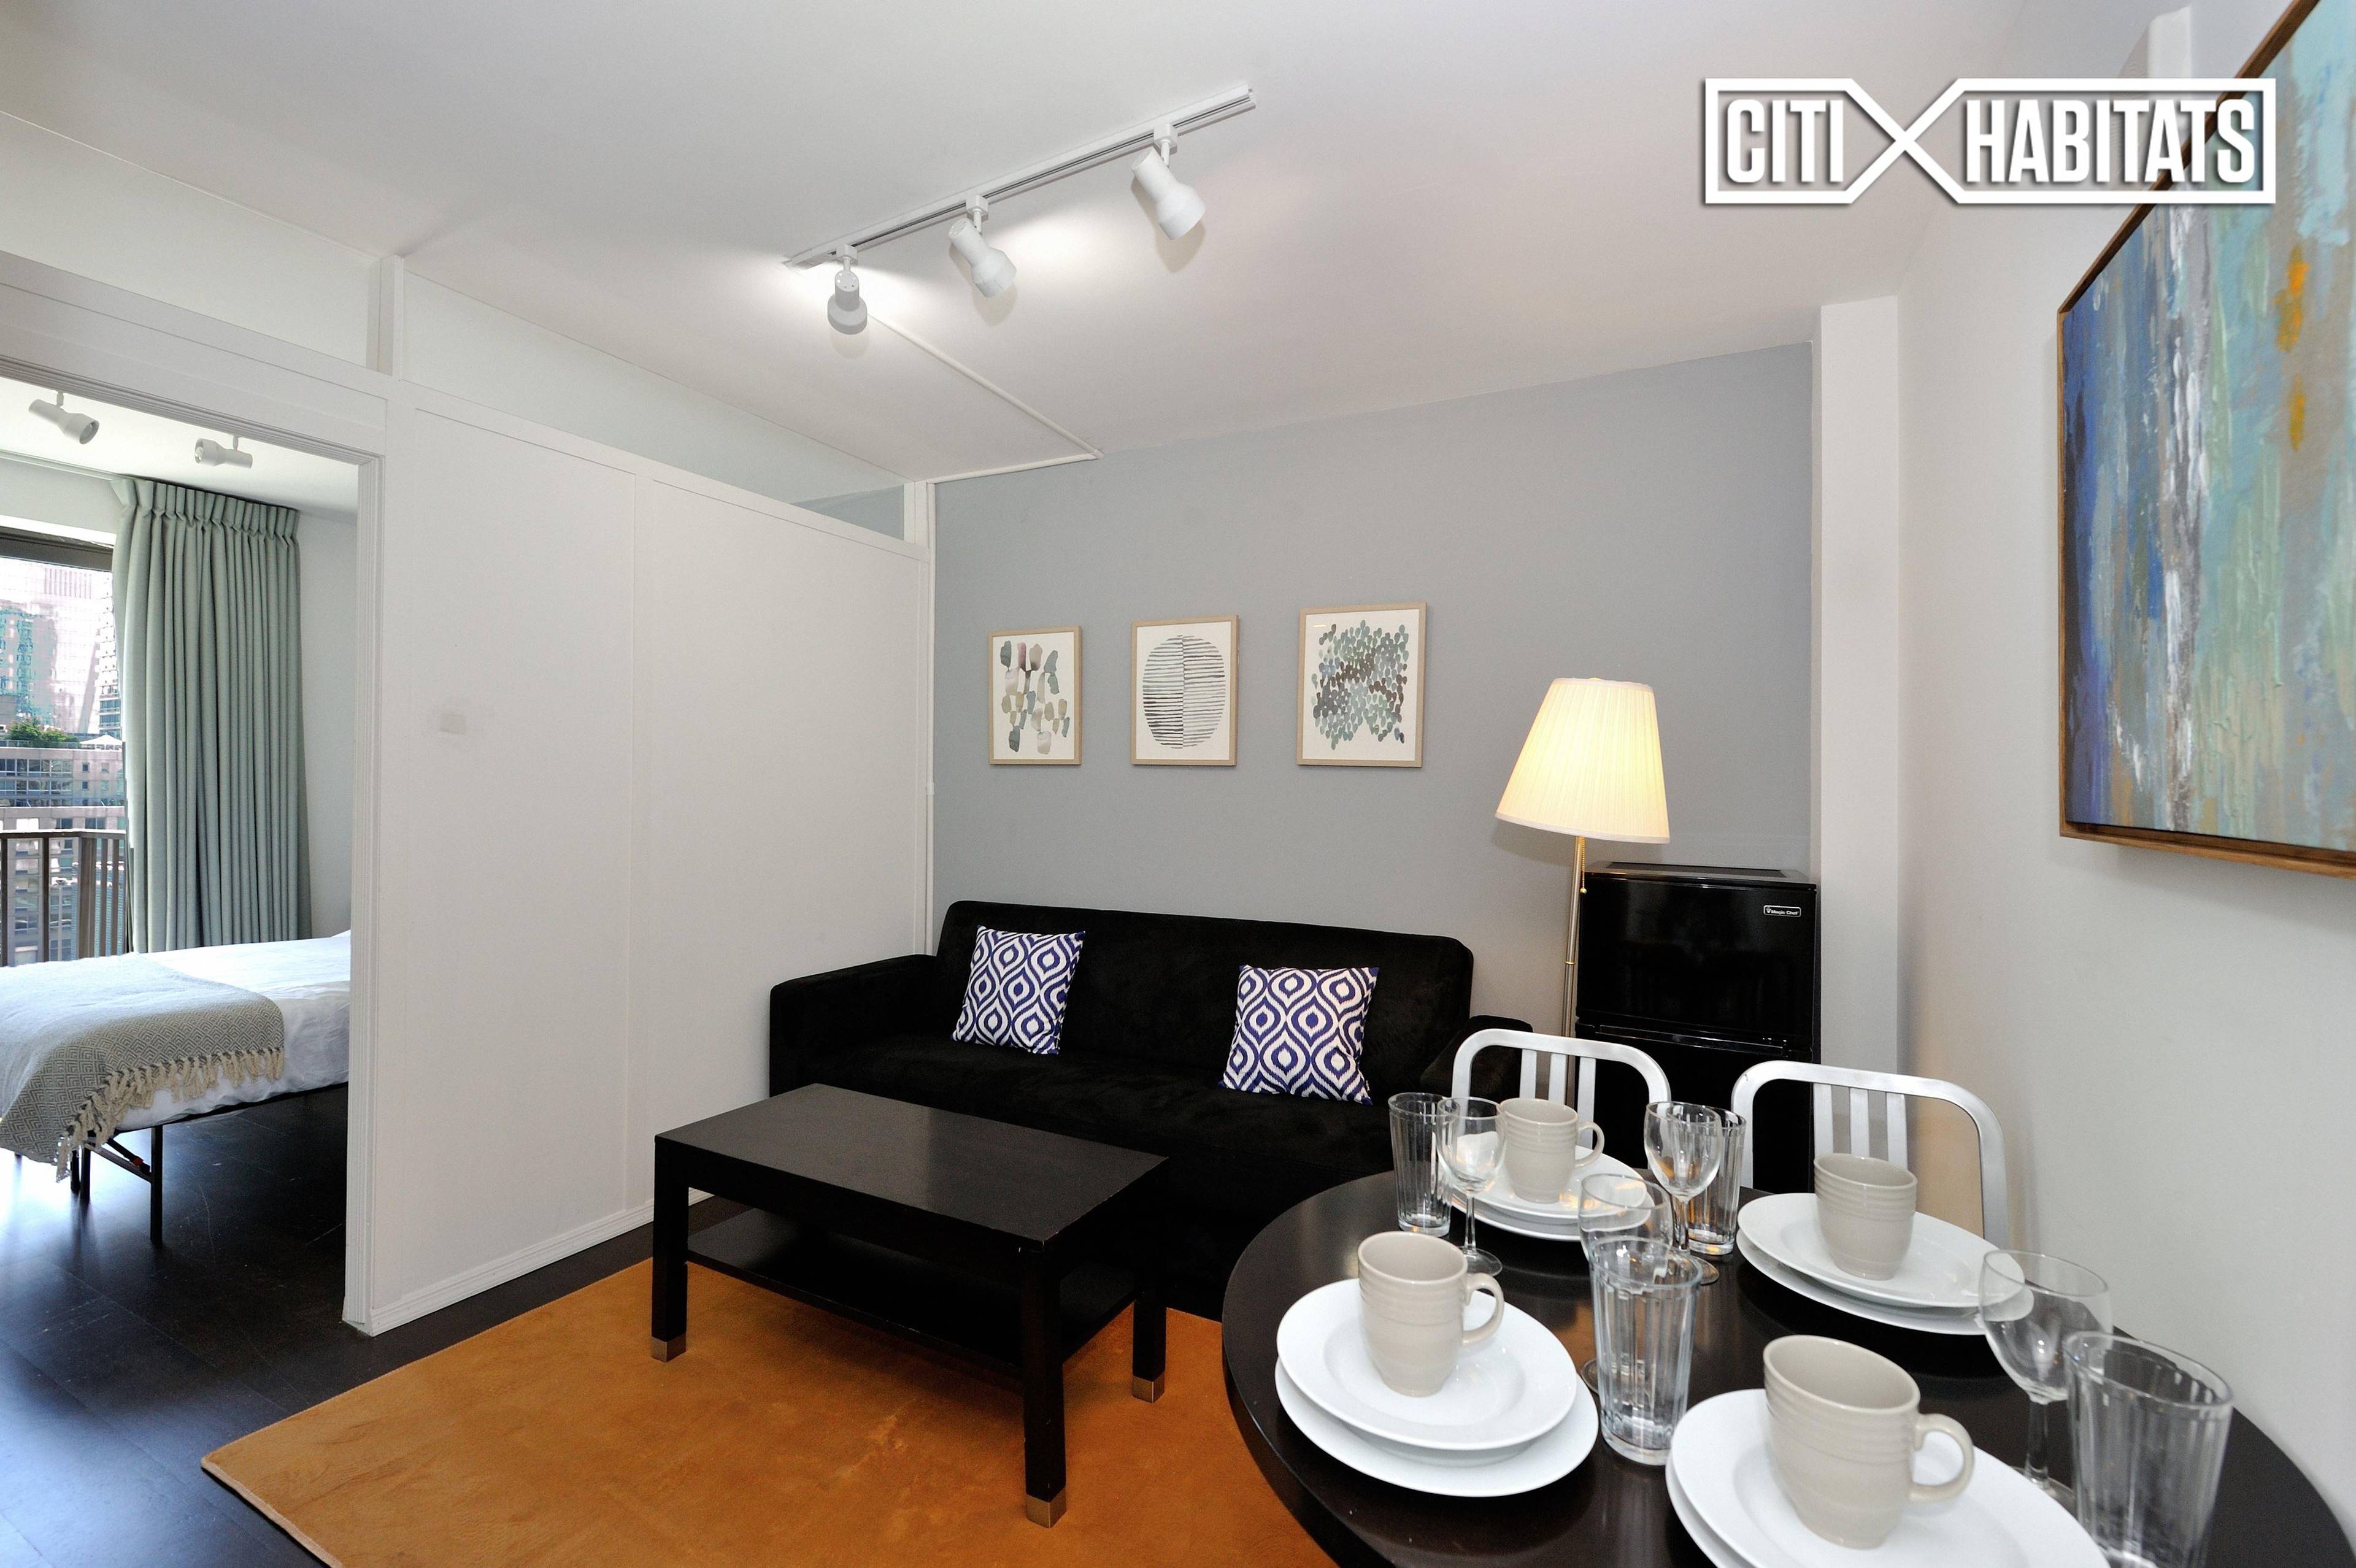 Come stay in this lovely two bedroom located within walking distance to Times Square.